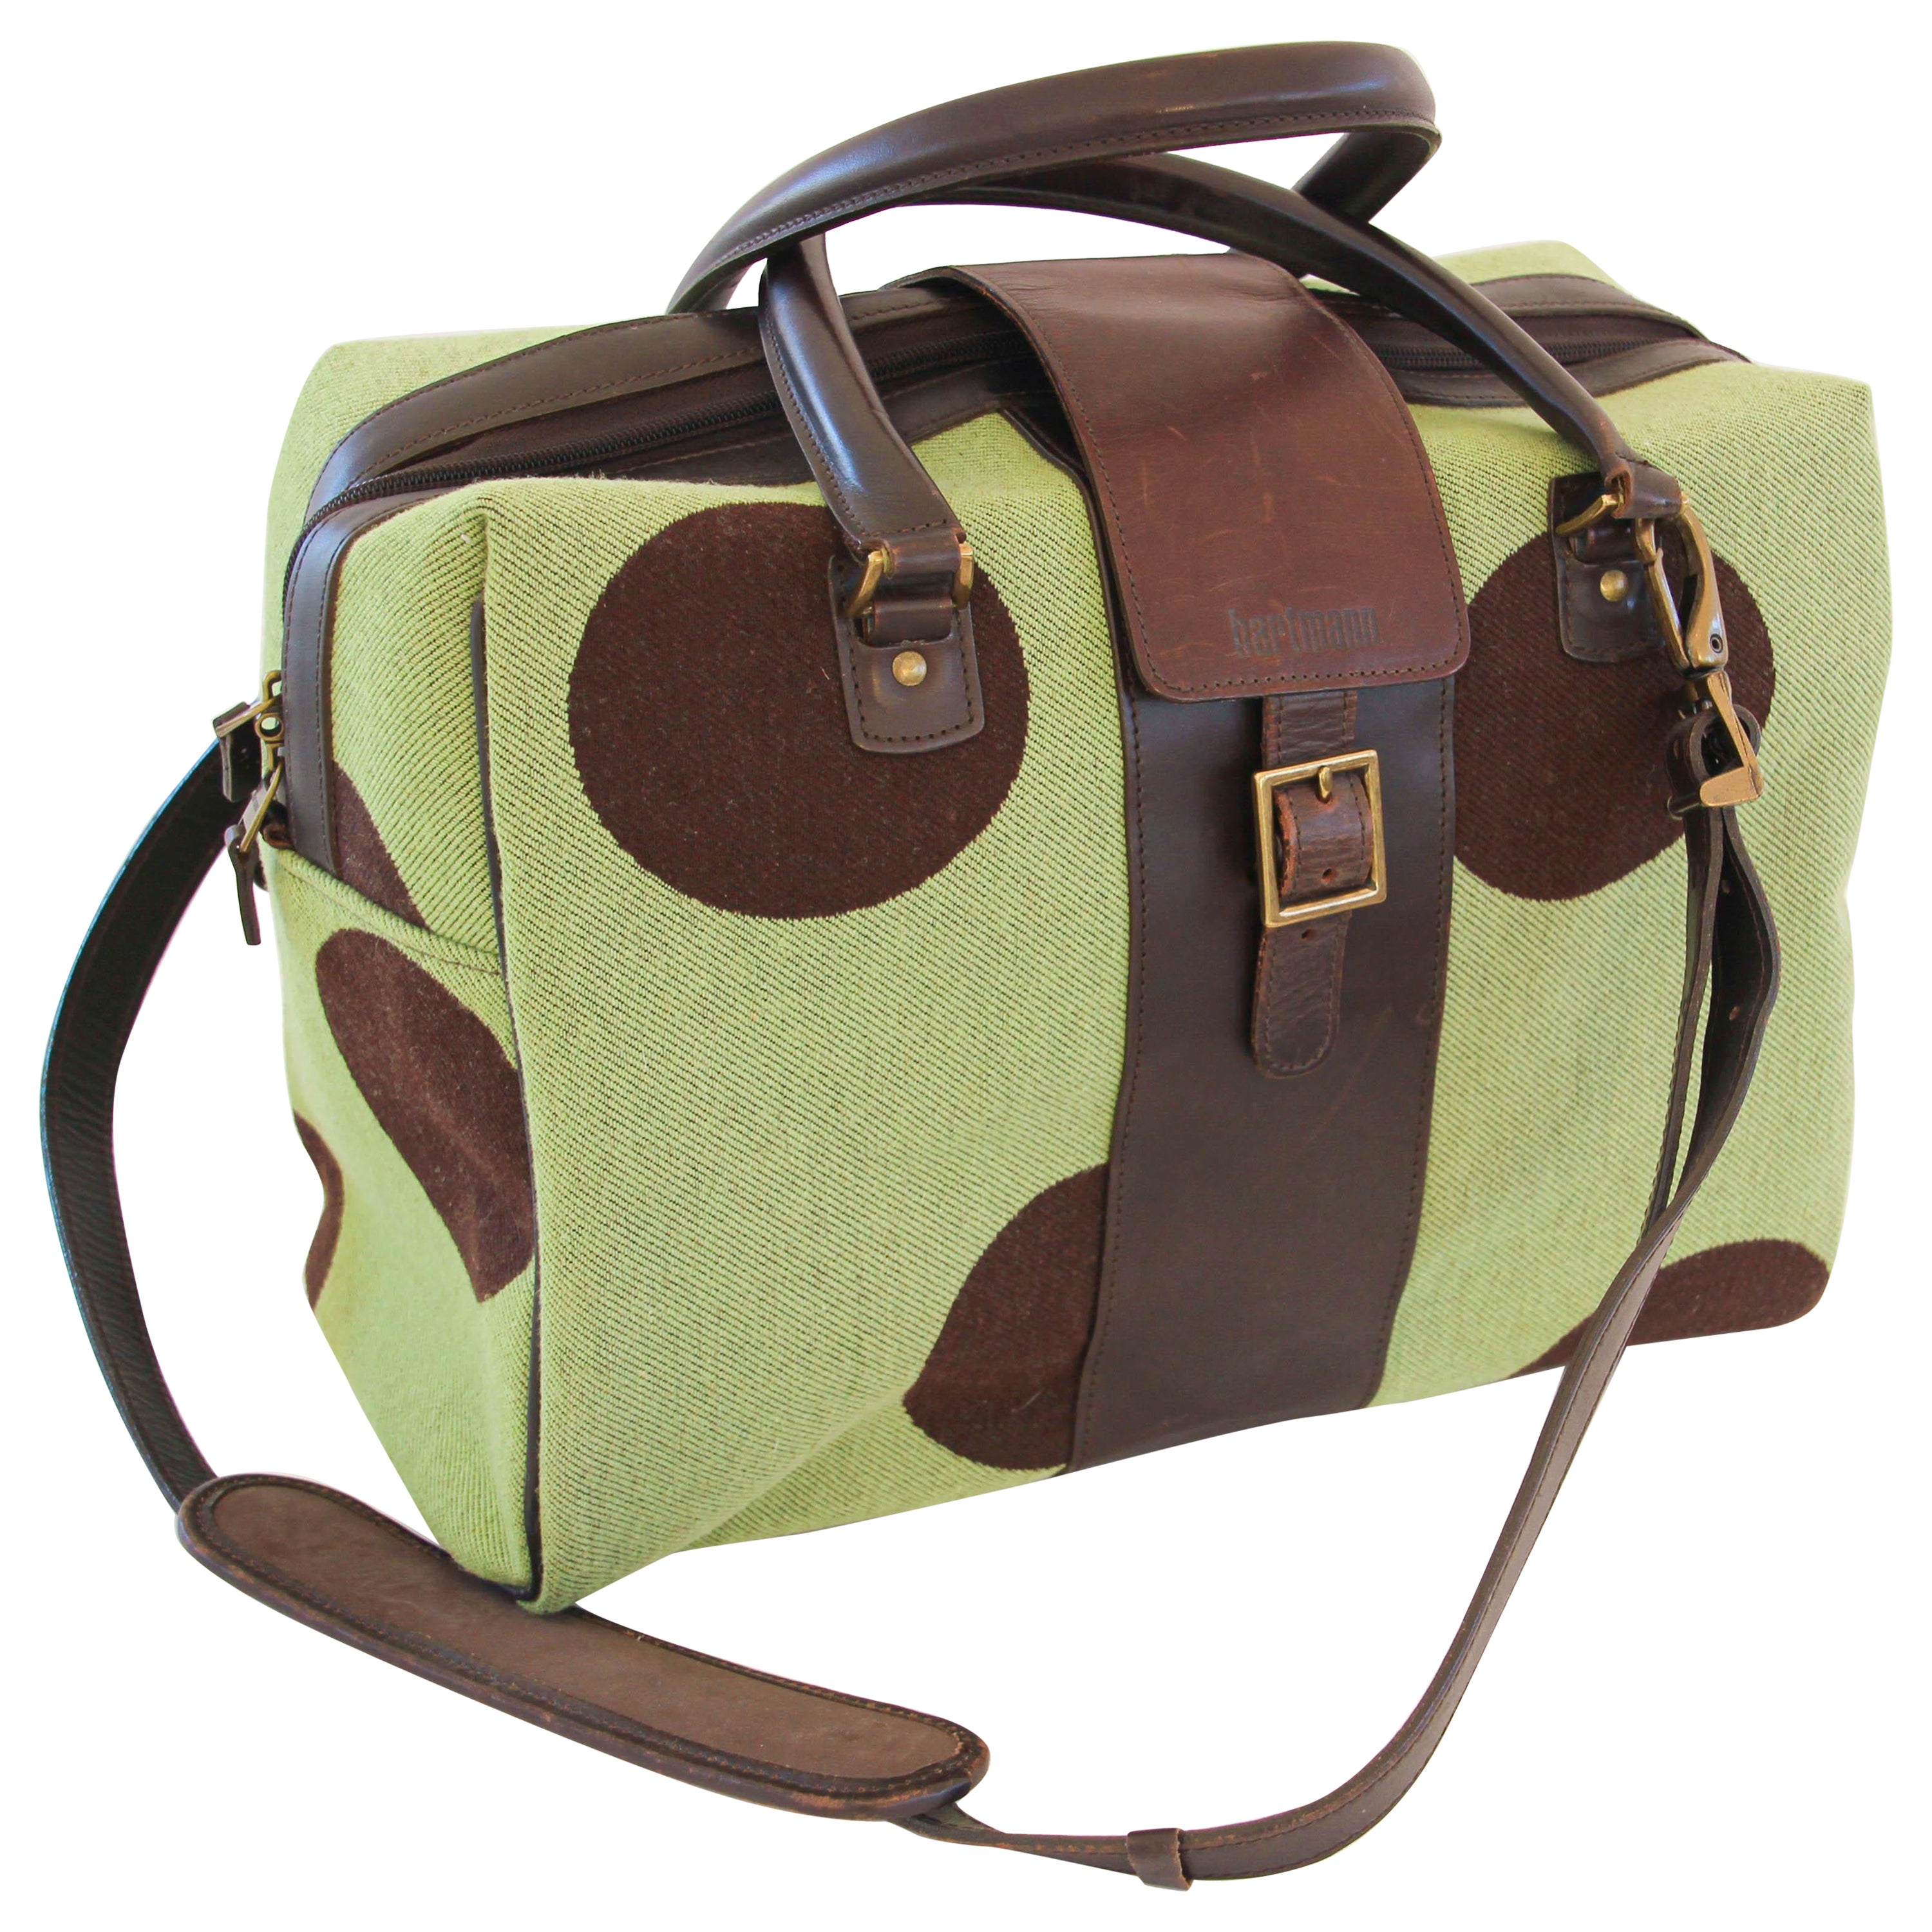 Hartmann Retro Carry-On in Apple Green with Polka Dot For Sale